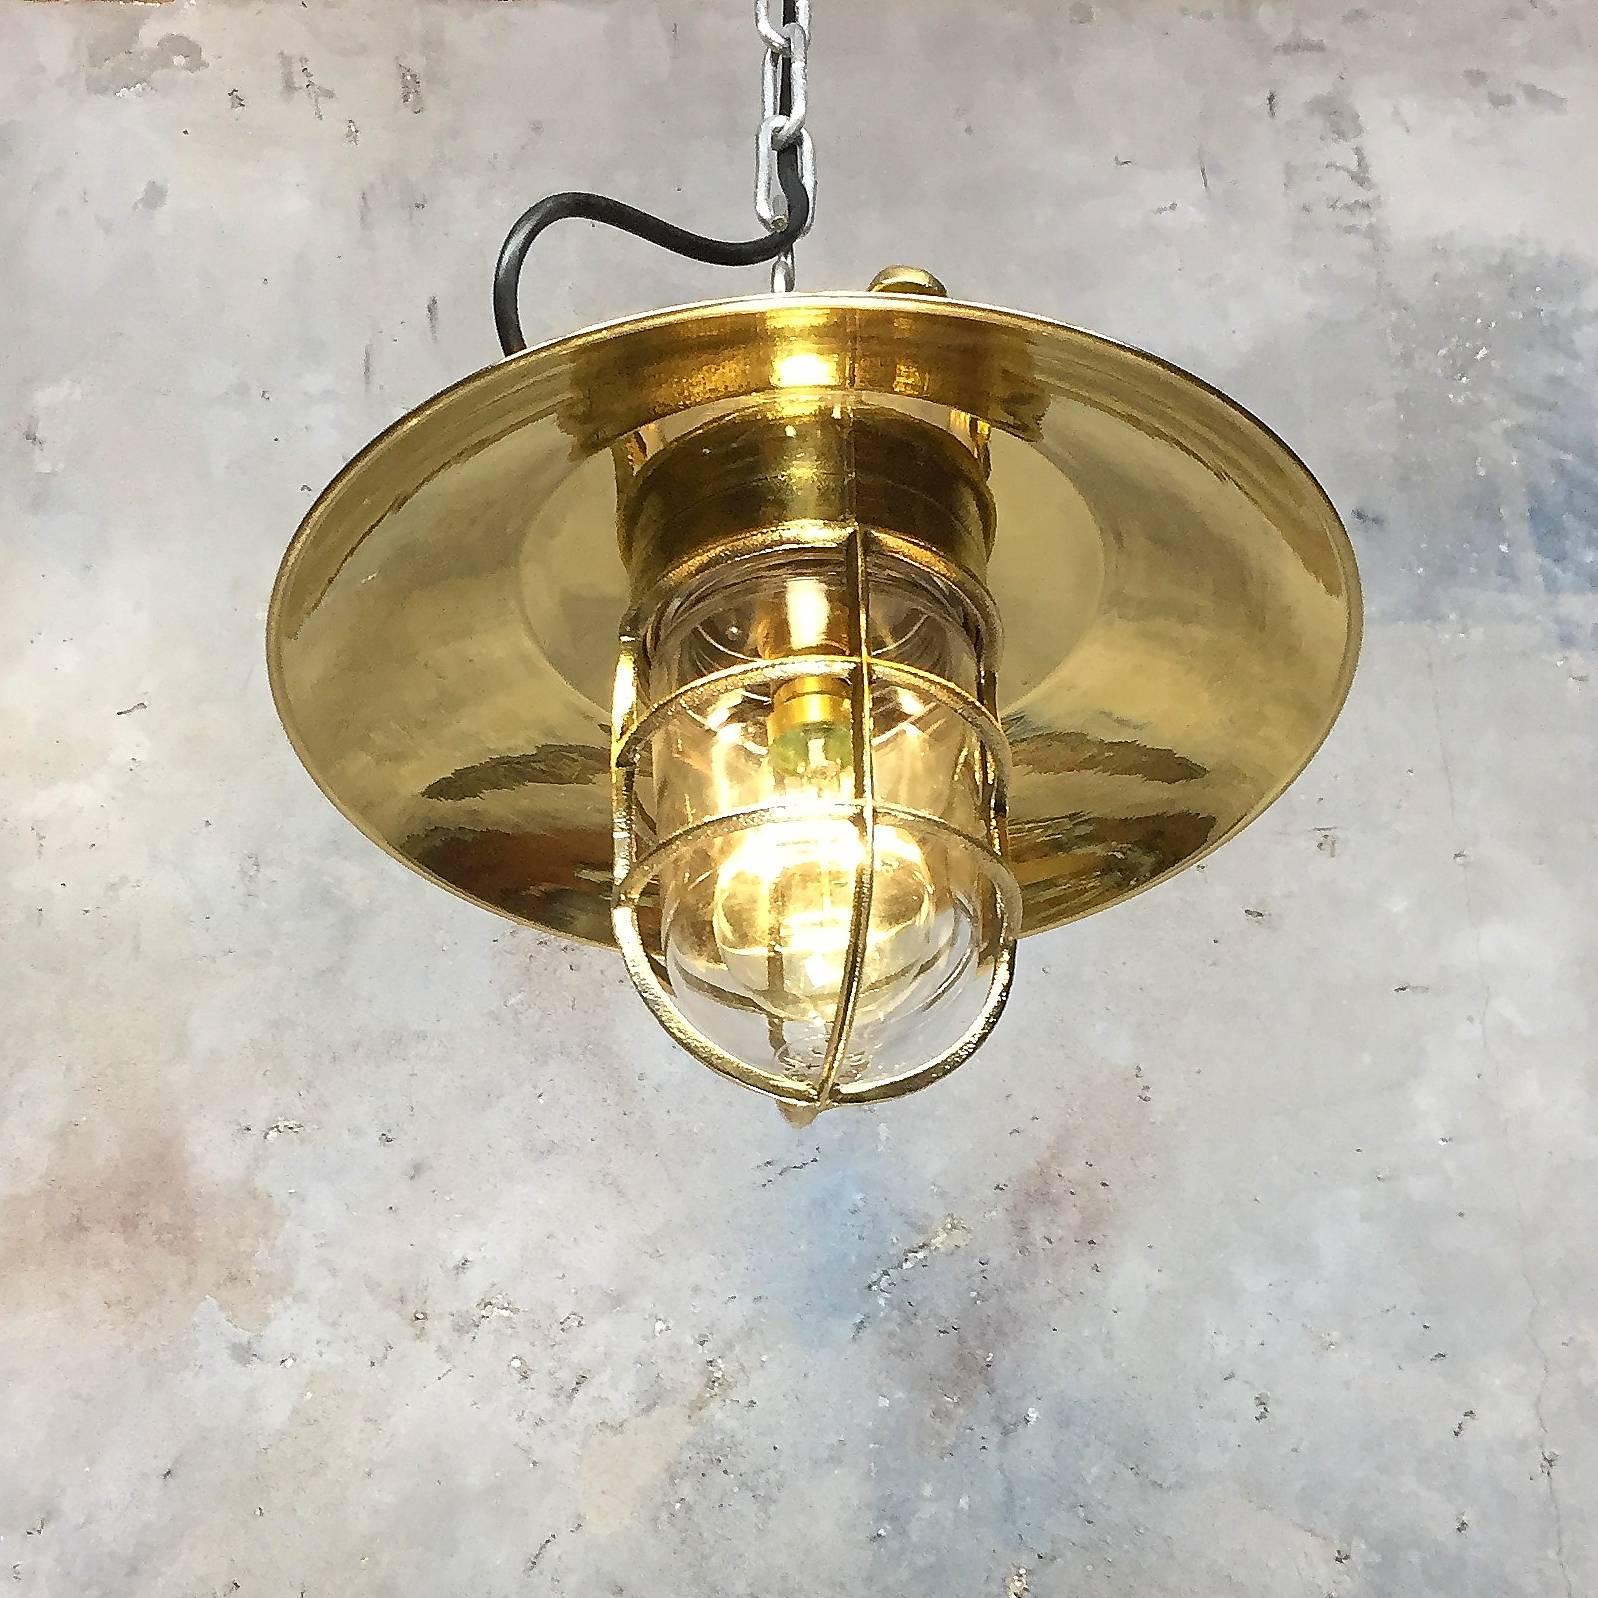 Solid brass explosion proof pendant.

Cast brass and glass. Sold without chain and s-hook. This excellent example of an original explosion proof lamp which was salvaged from an old Japanese cargo ship,

circa 1975.

Rewired and fitted with a